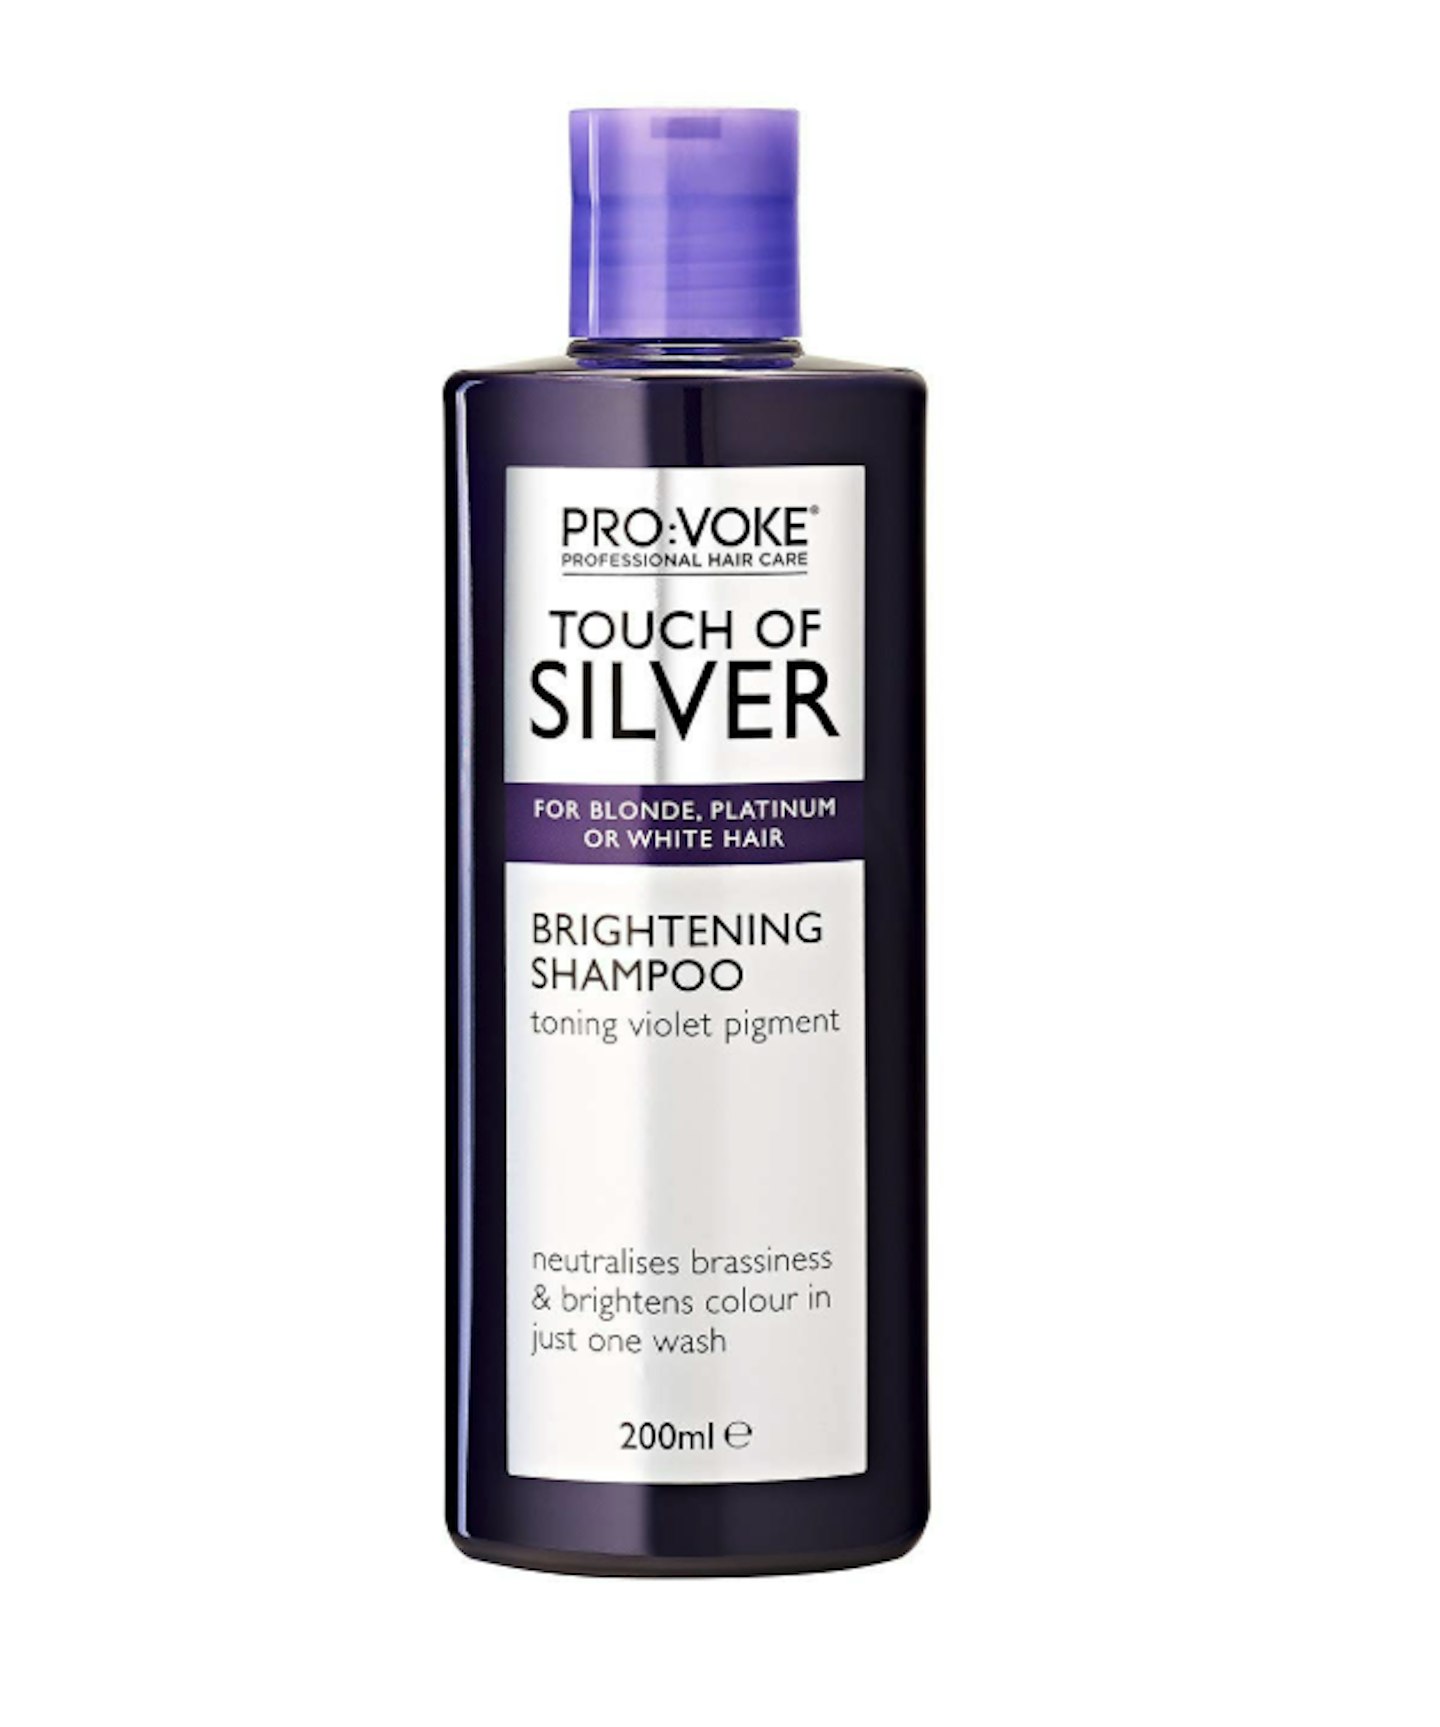 Provoke Touch Of Silver Brightening Shampoo, £3